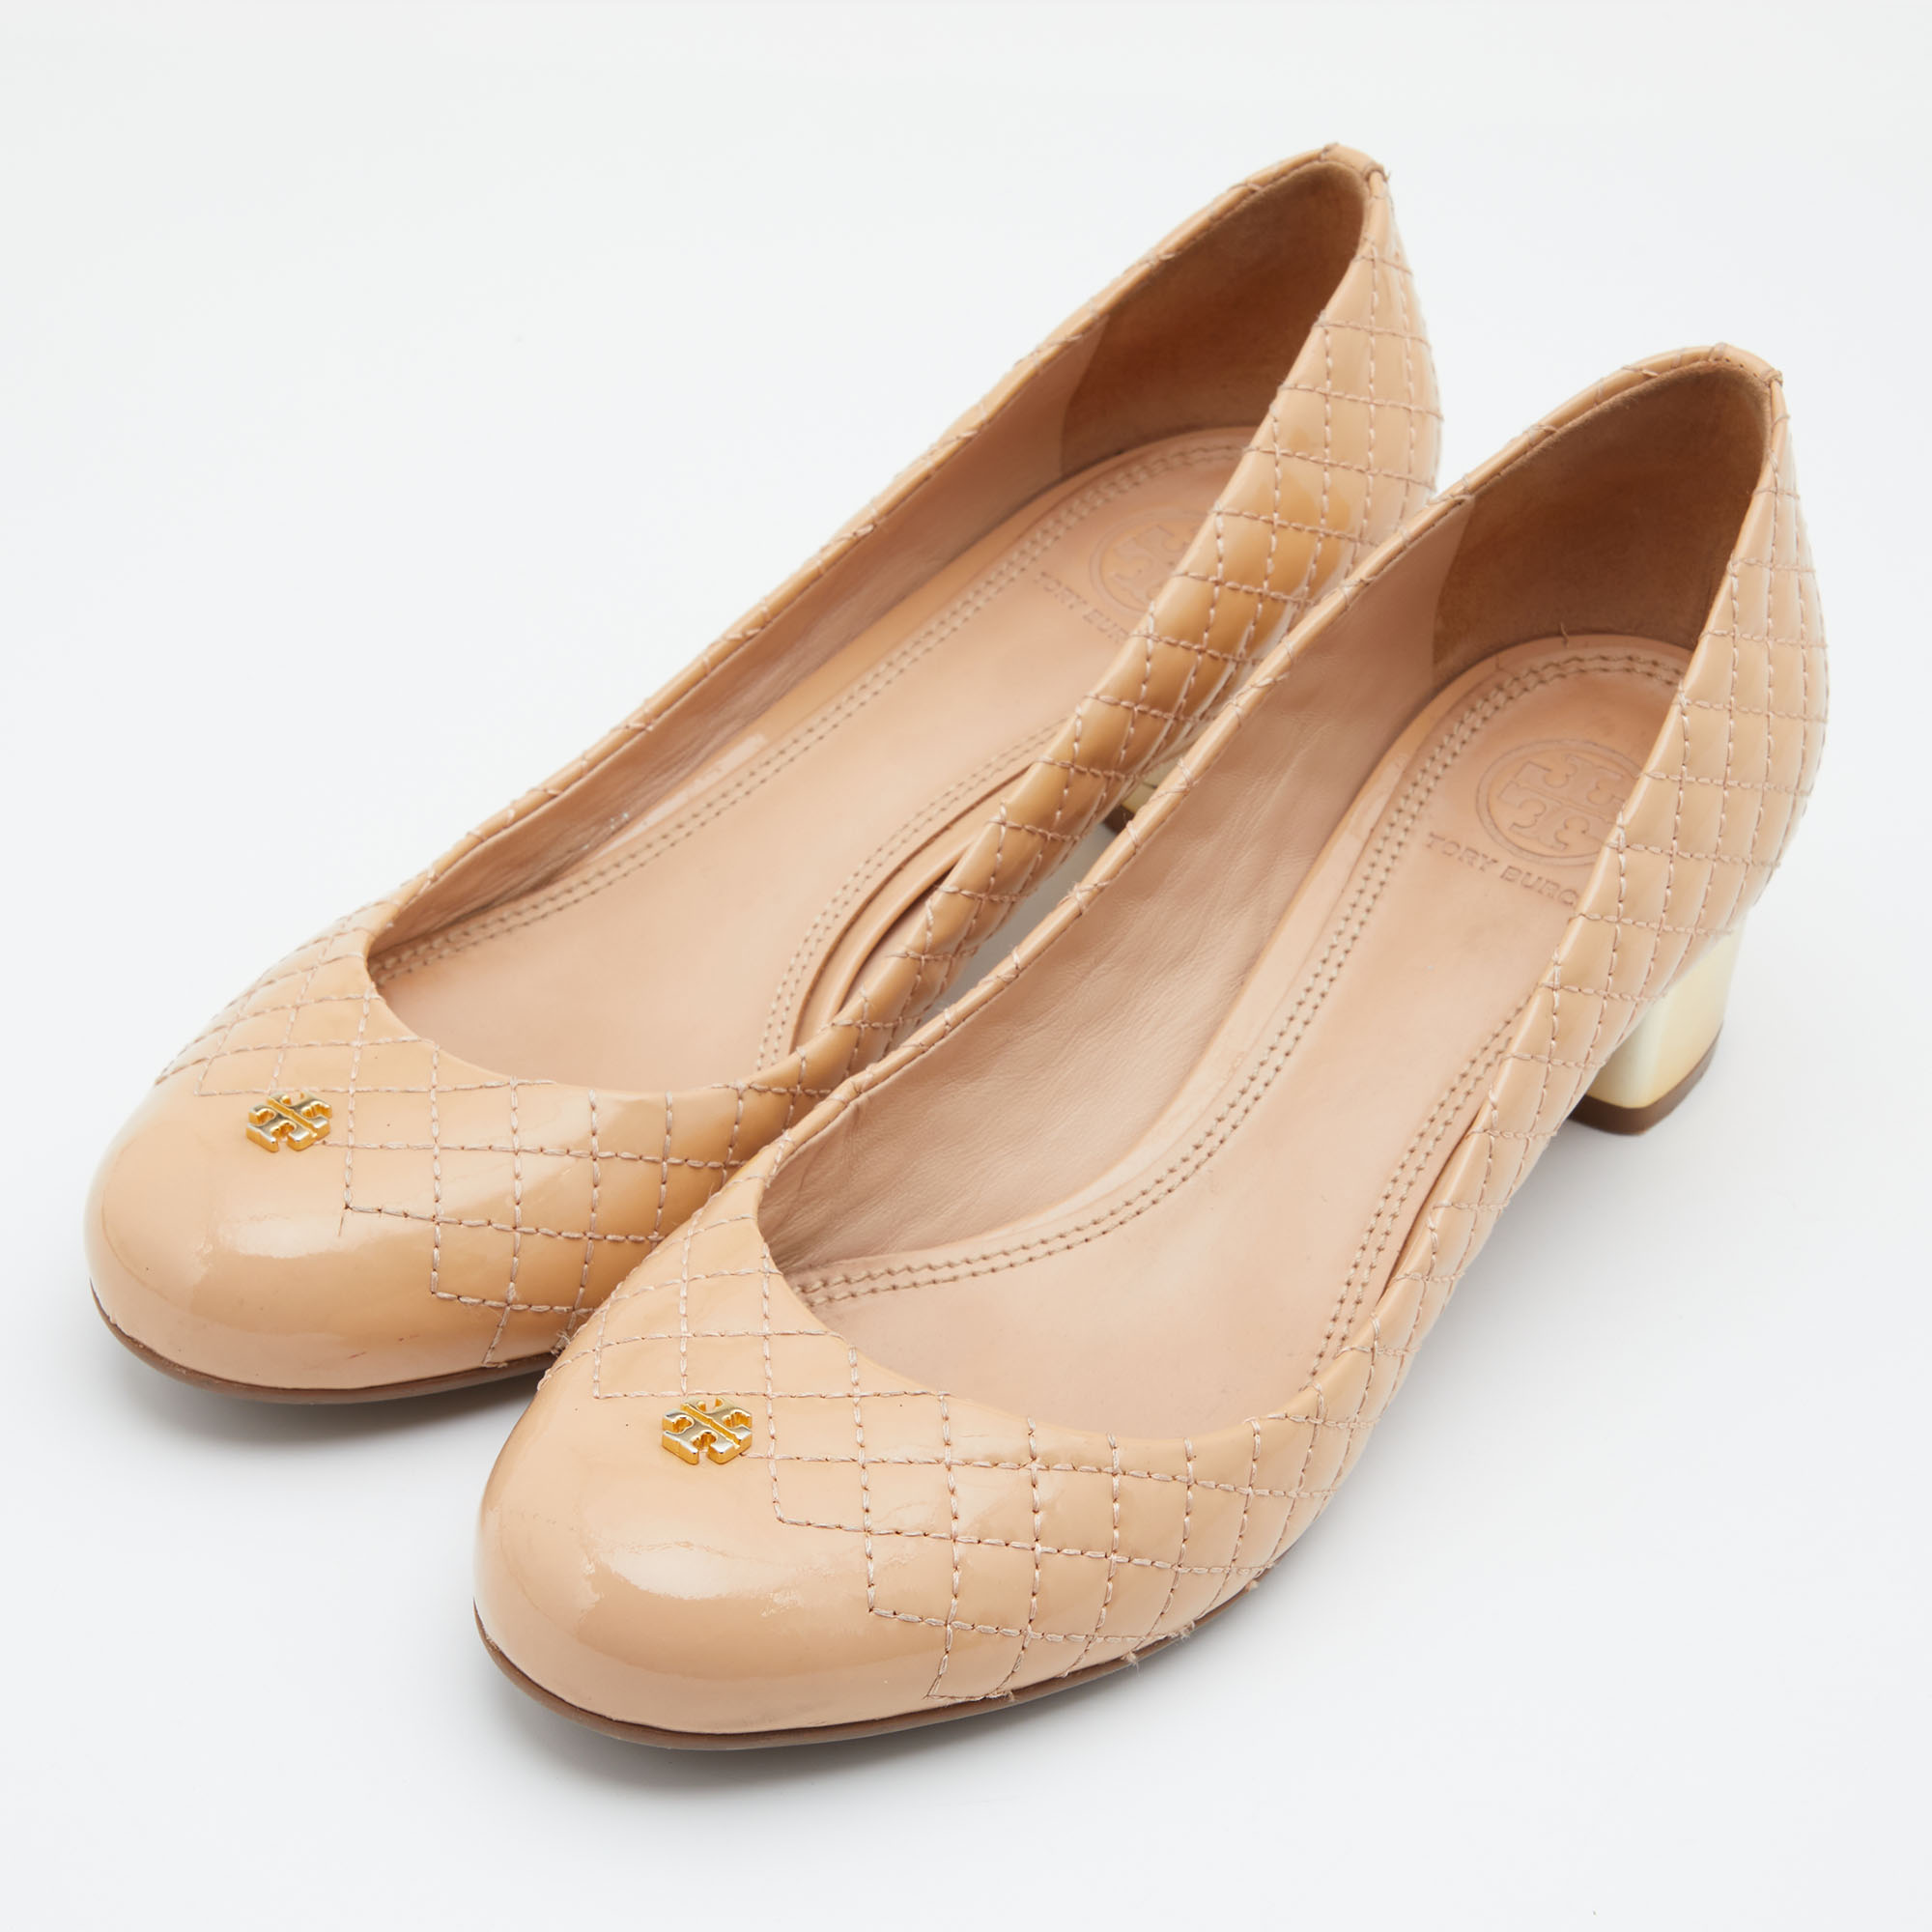 

Tory Burch Beige Quilted Patent Leather Block Heel Pumps Size